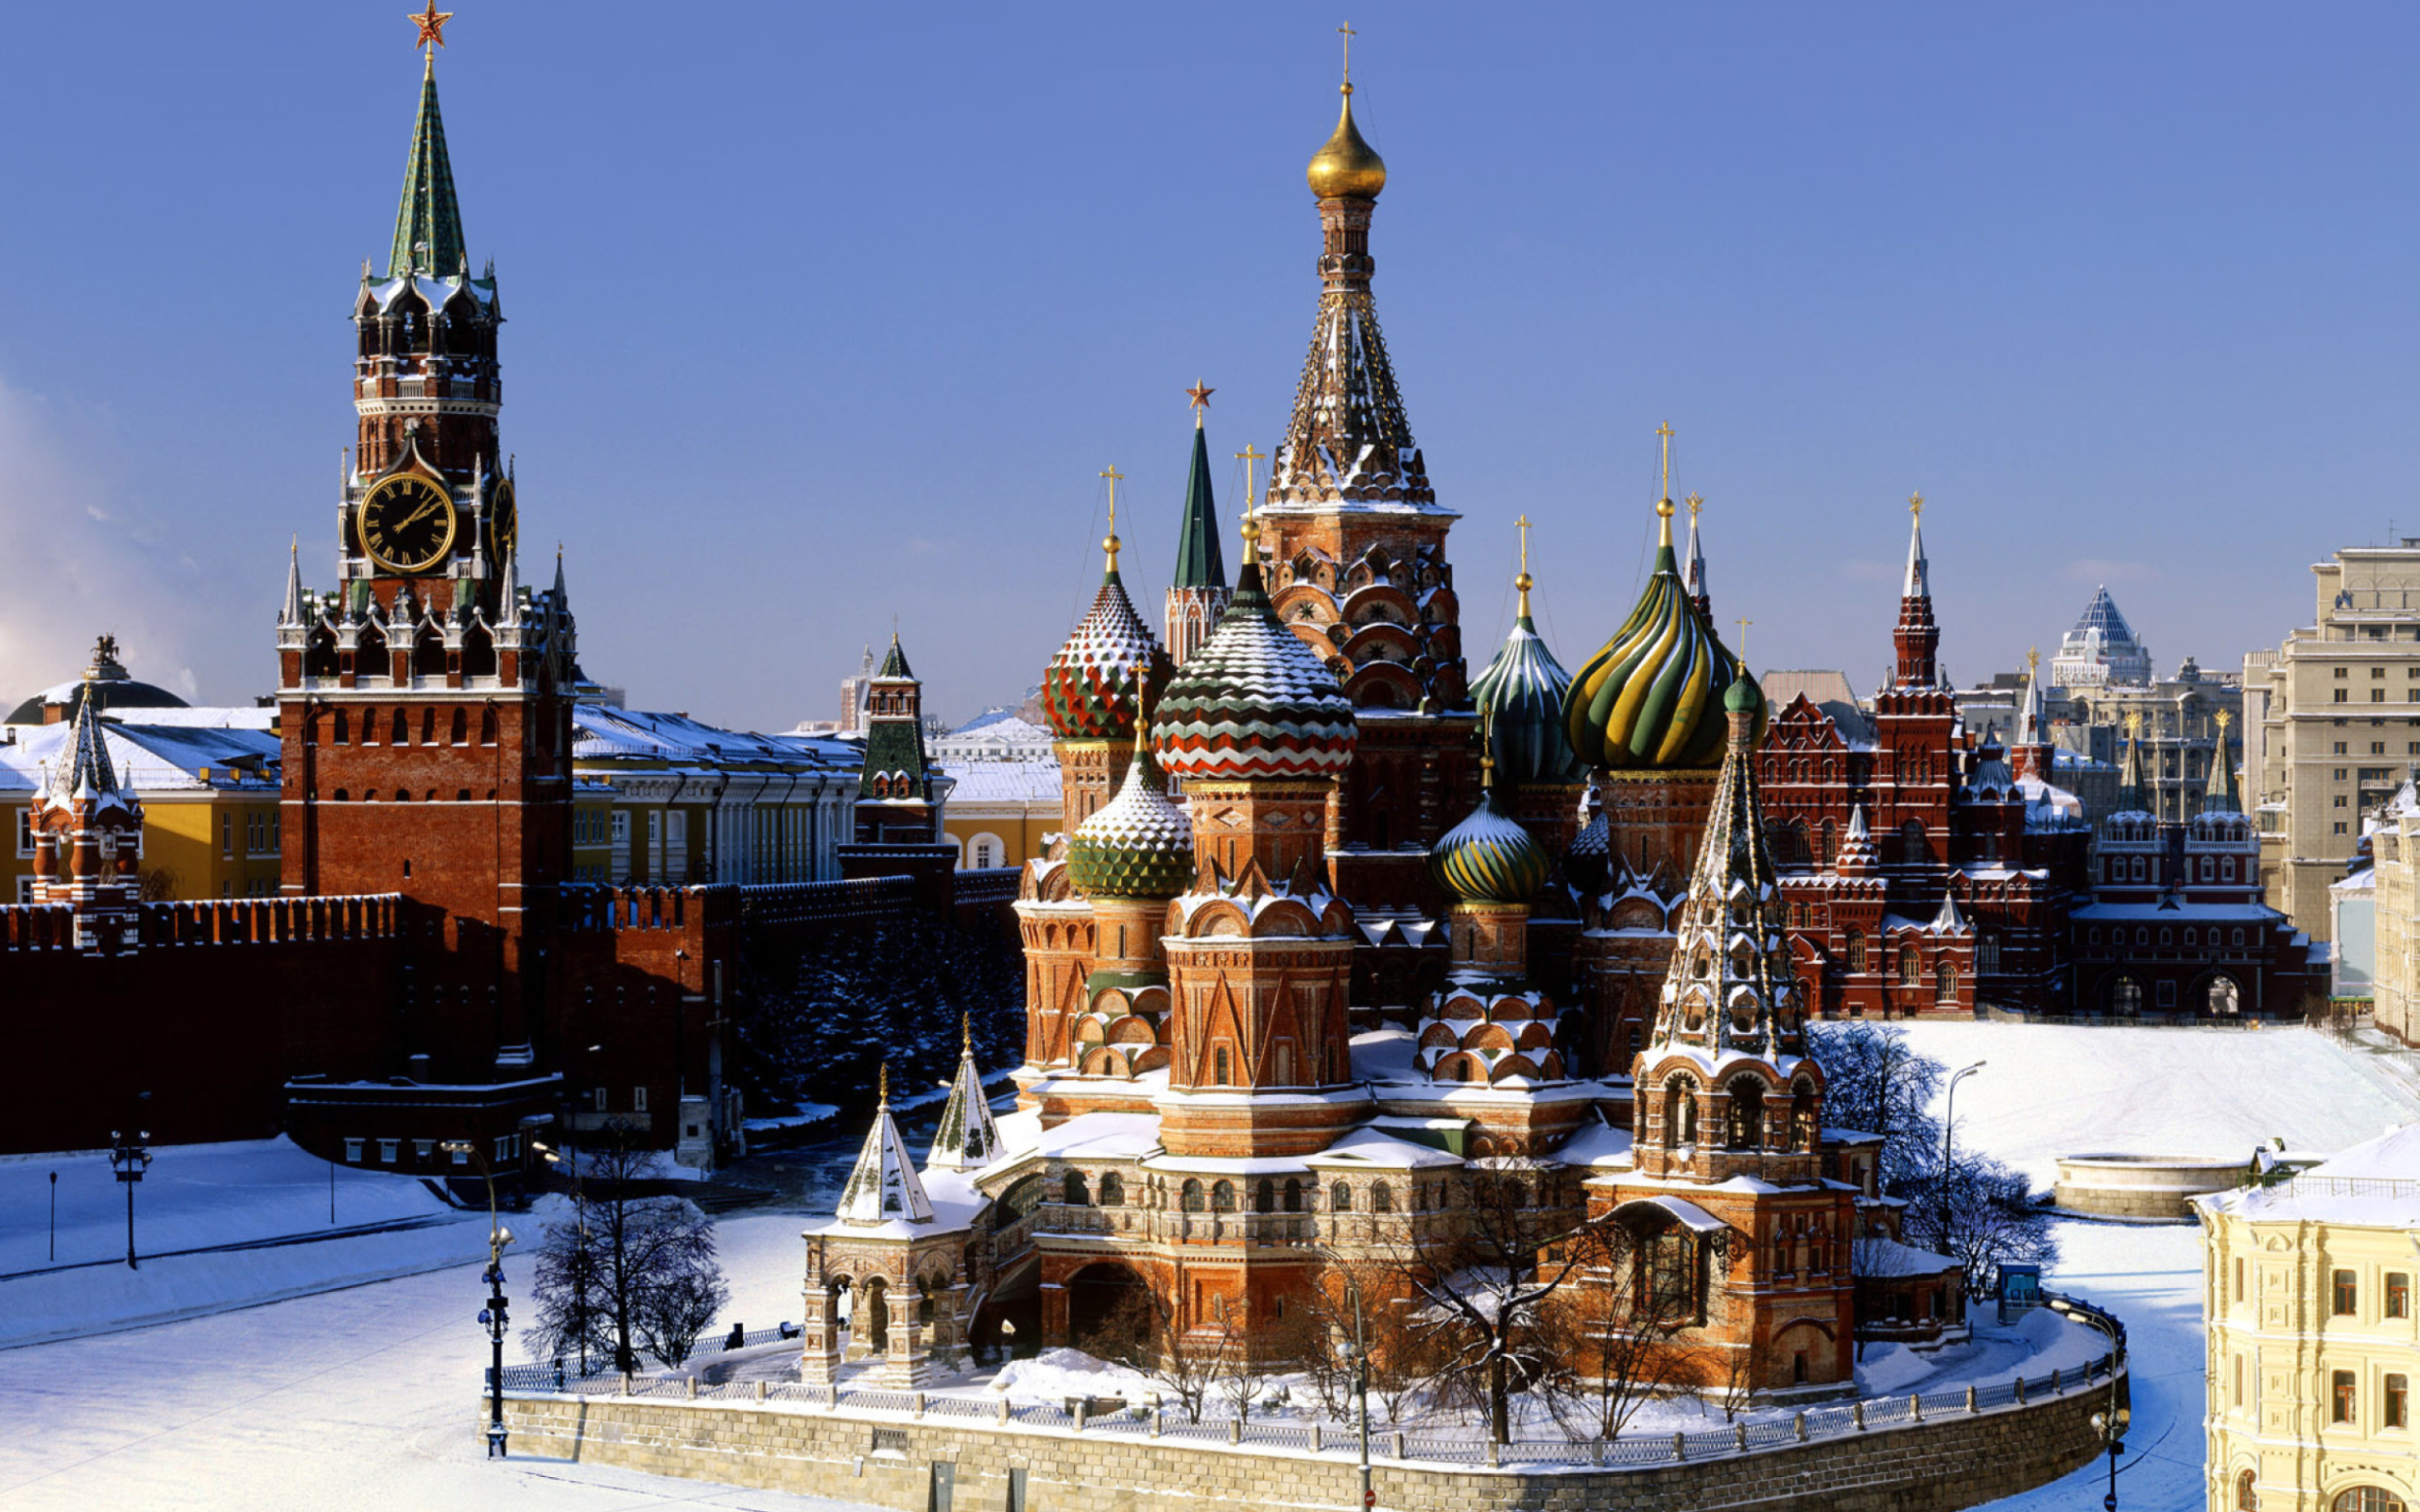 Das Moscow - Red Square Wallpaper 2560x1600